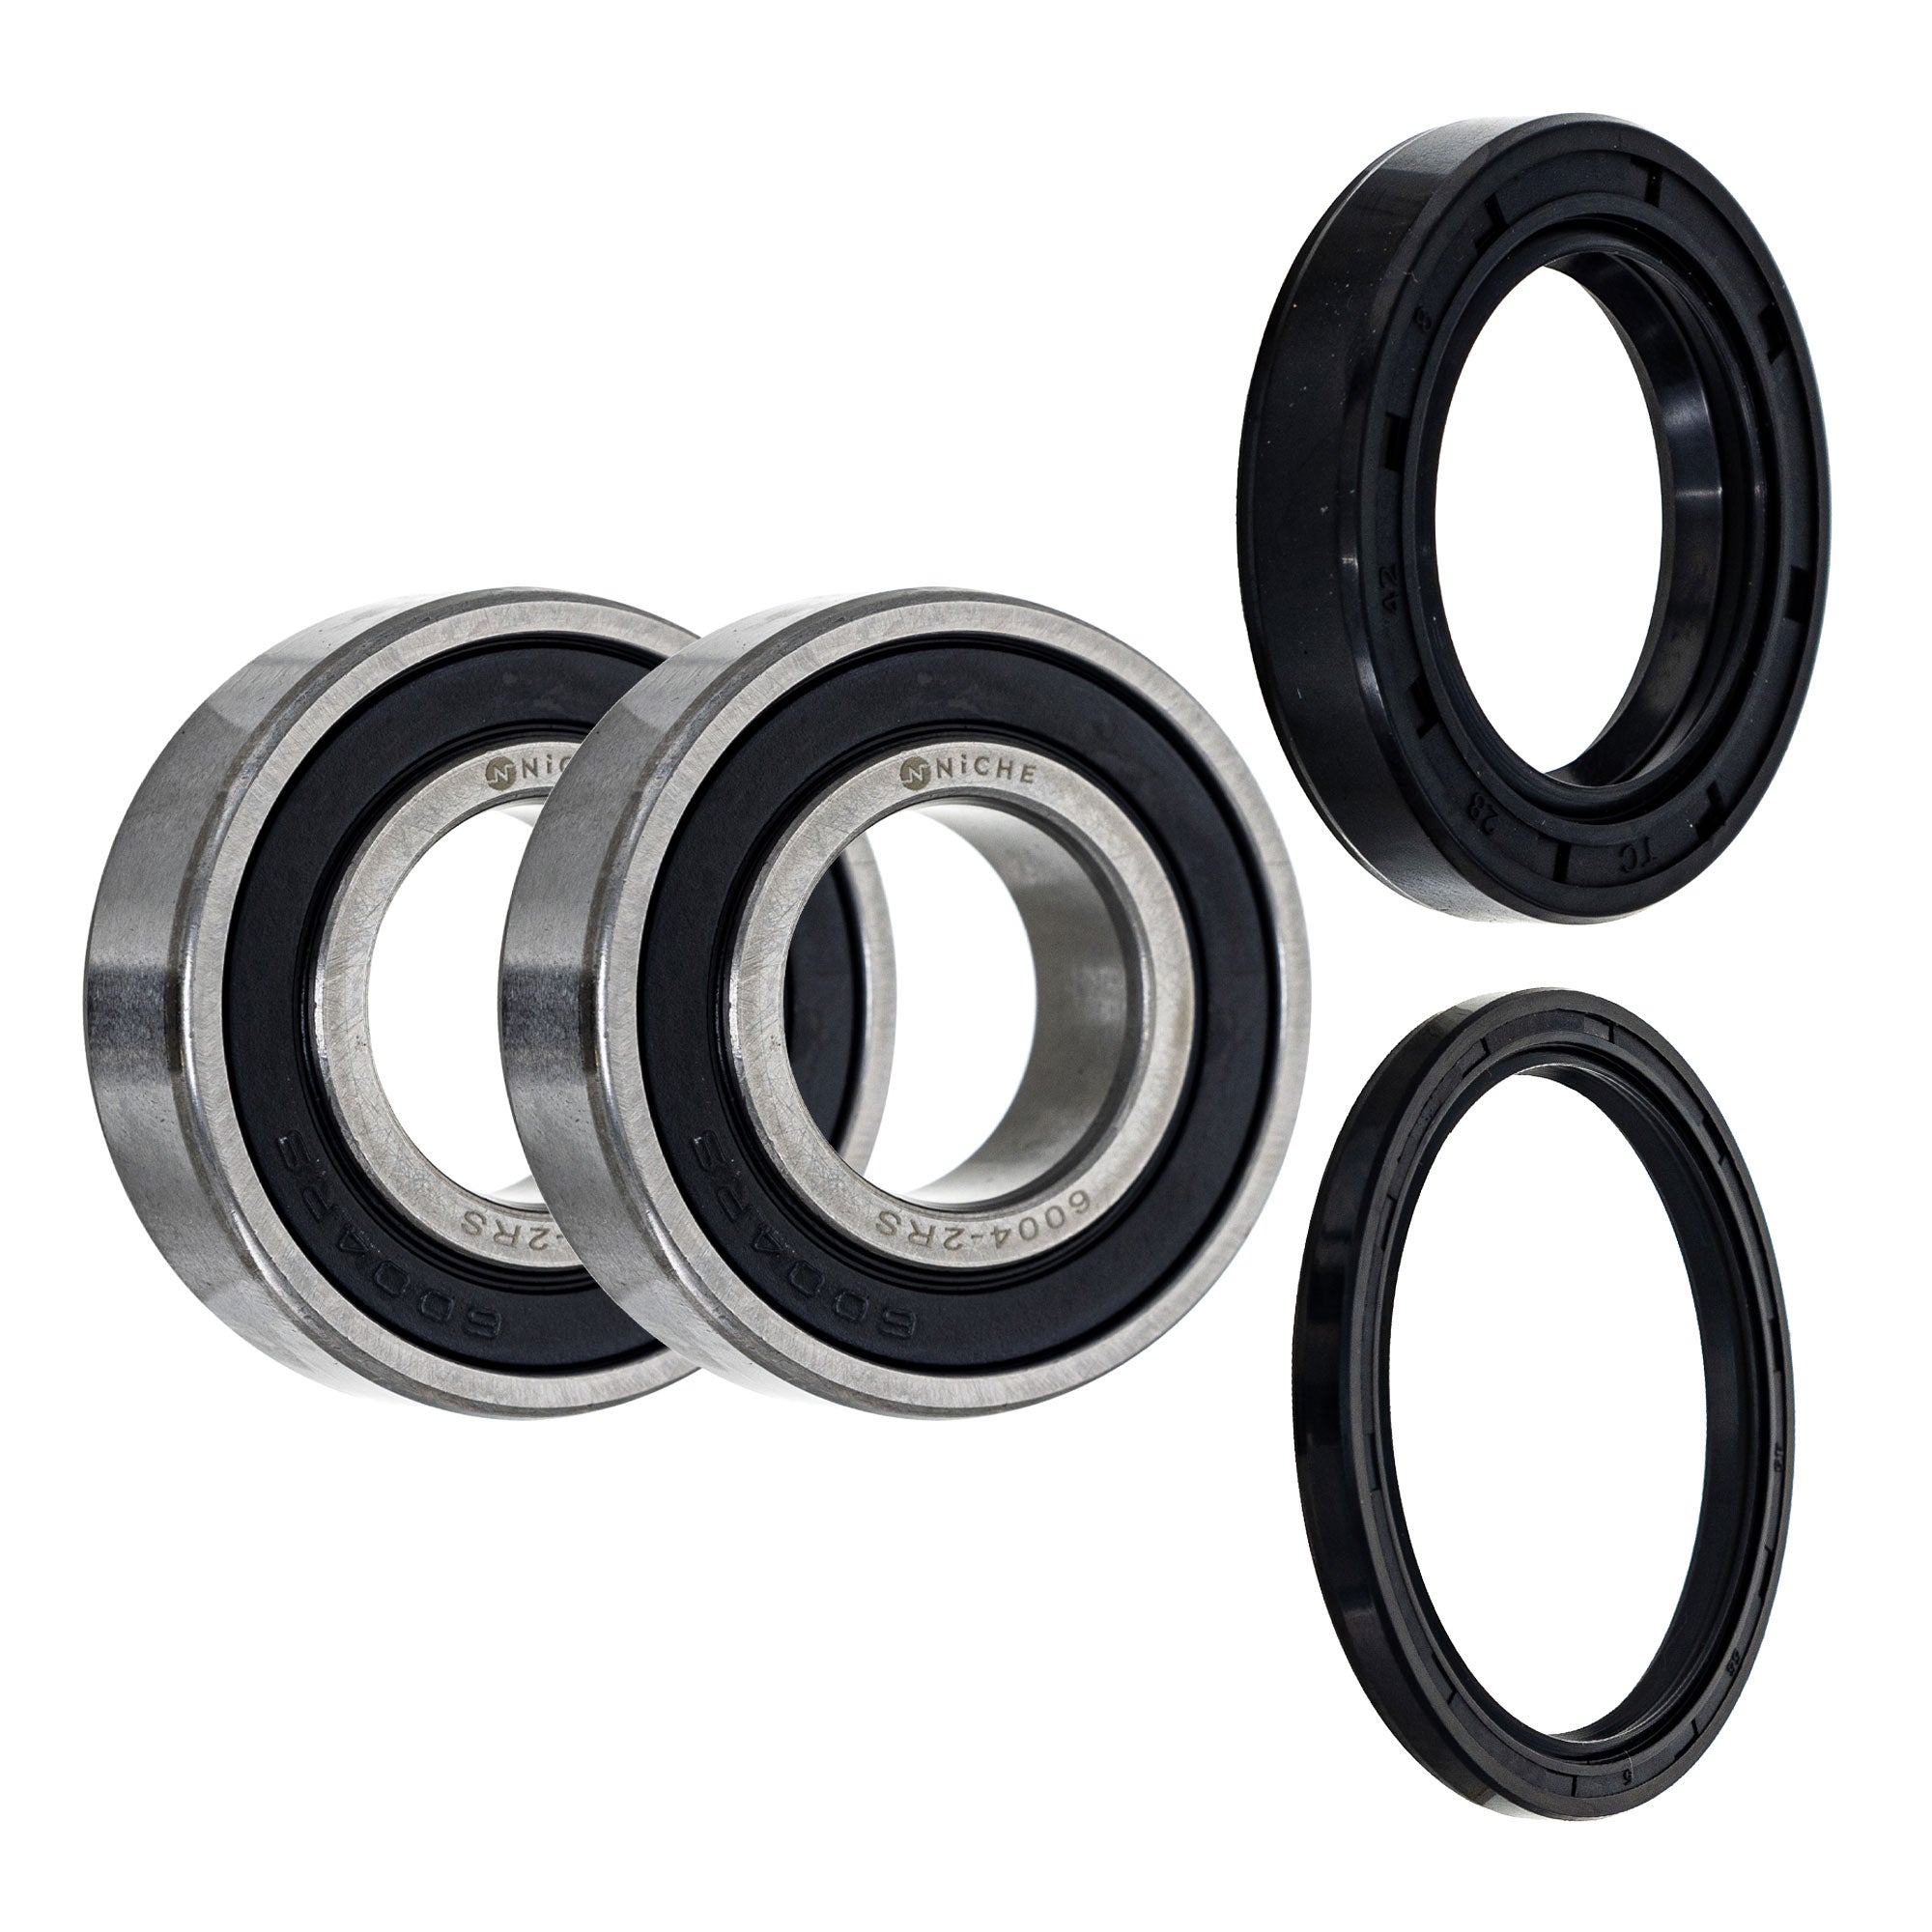 Wheel Bearing Seal Kit for zOTHER Ref No Super ST1100 Shadow Pacific NICHE MK1009037